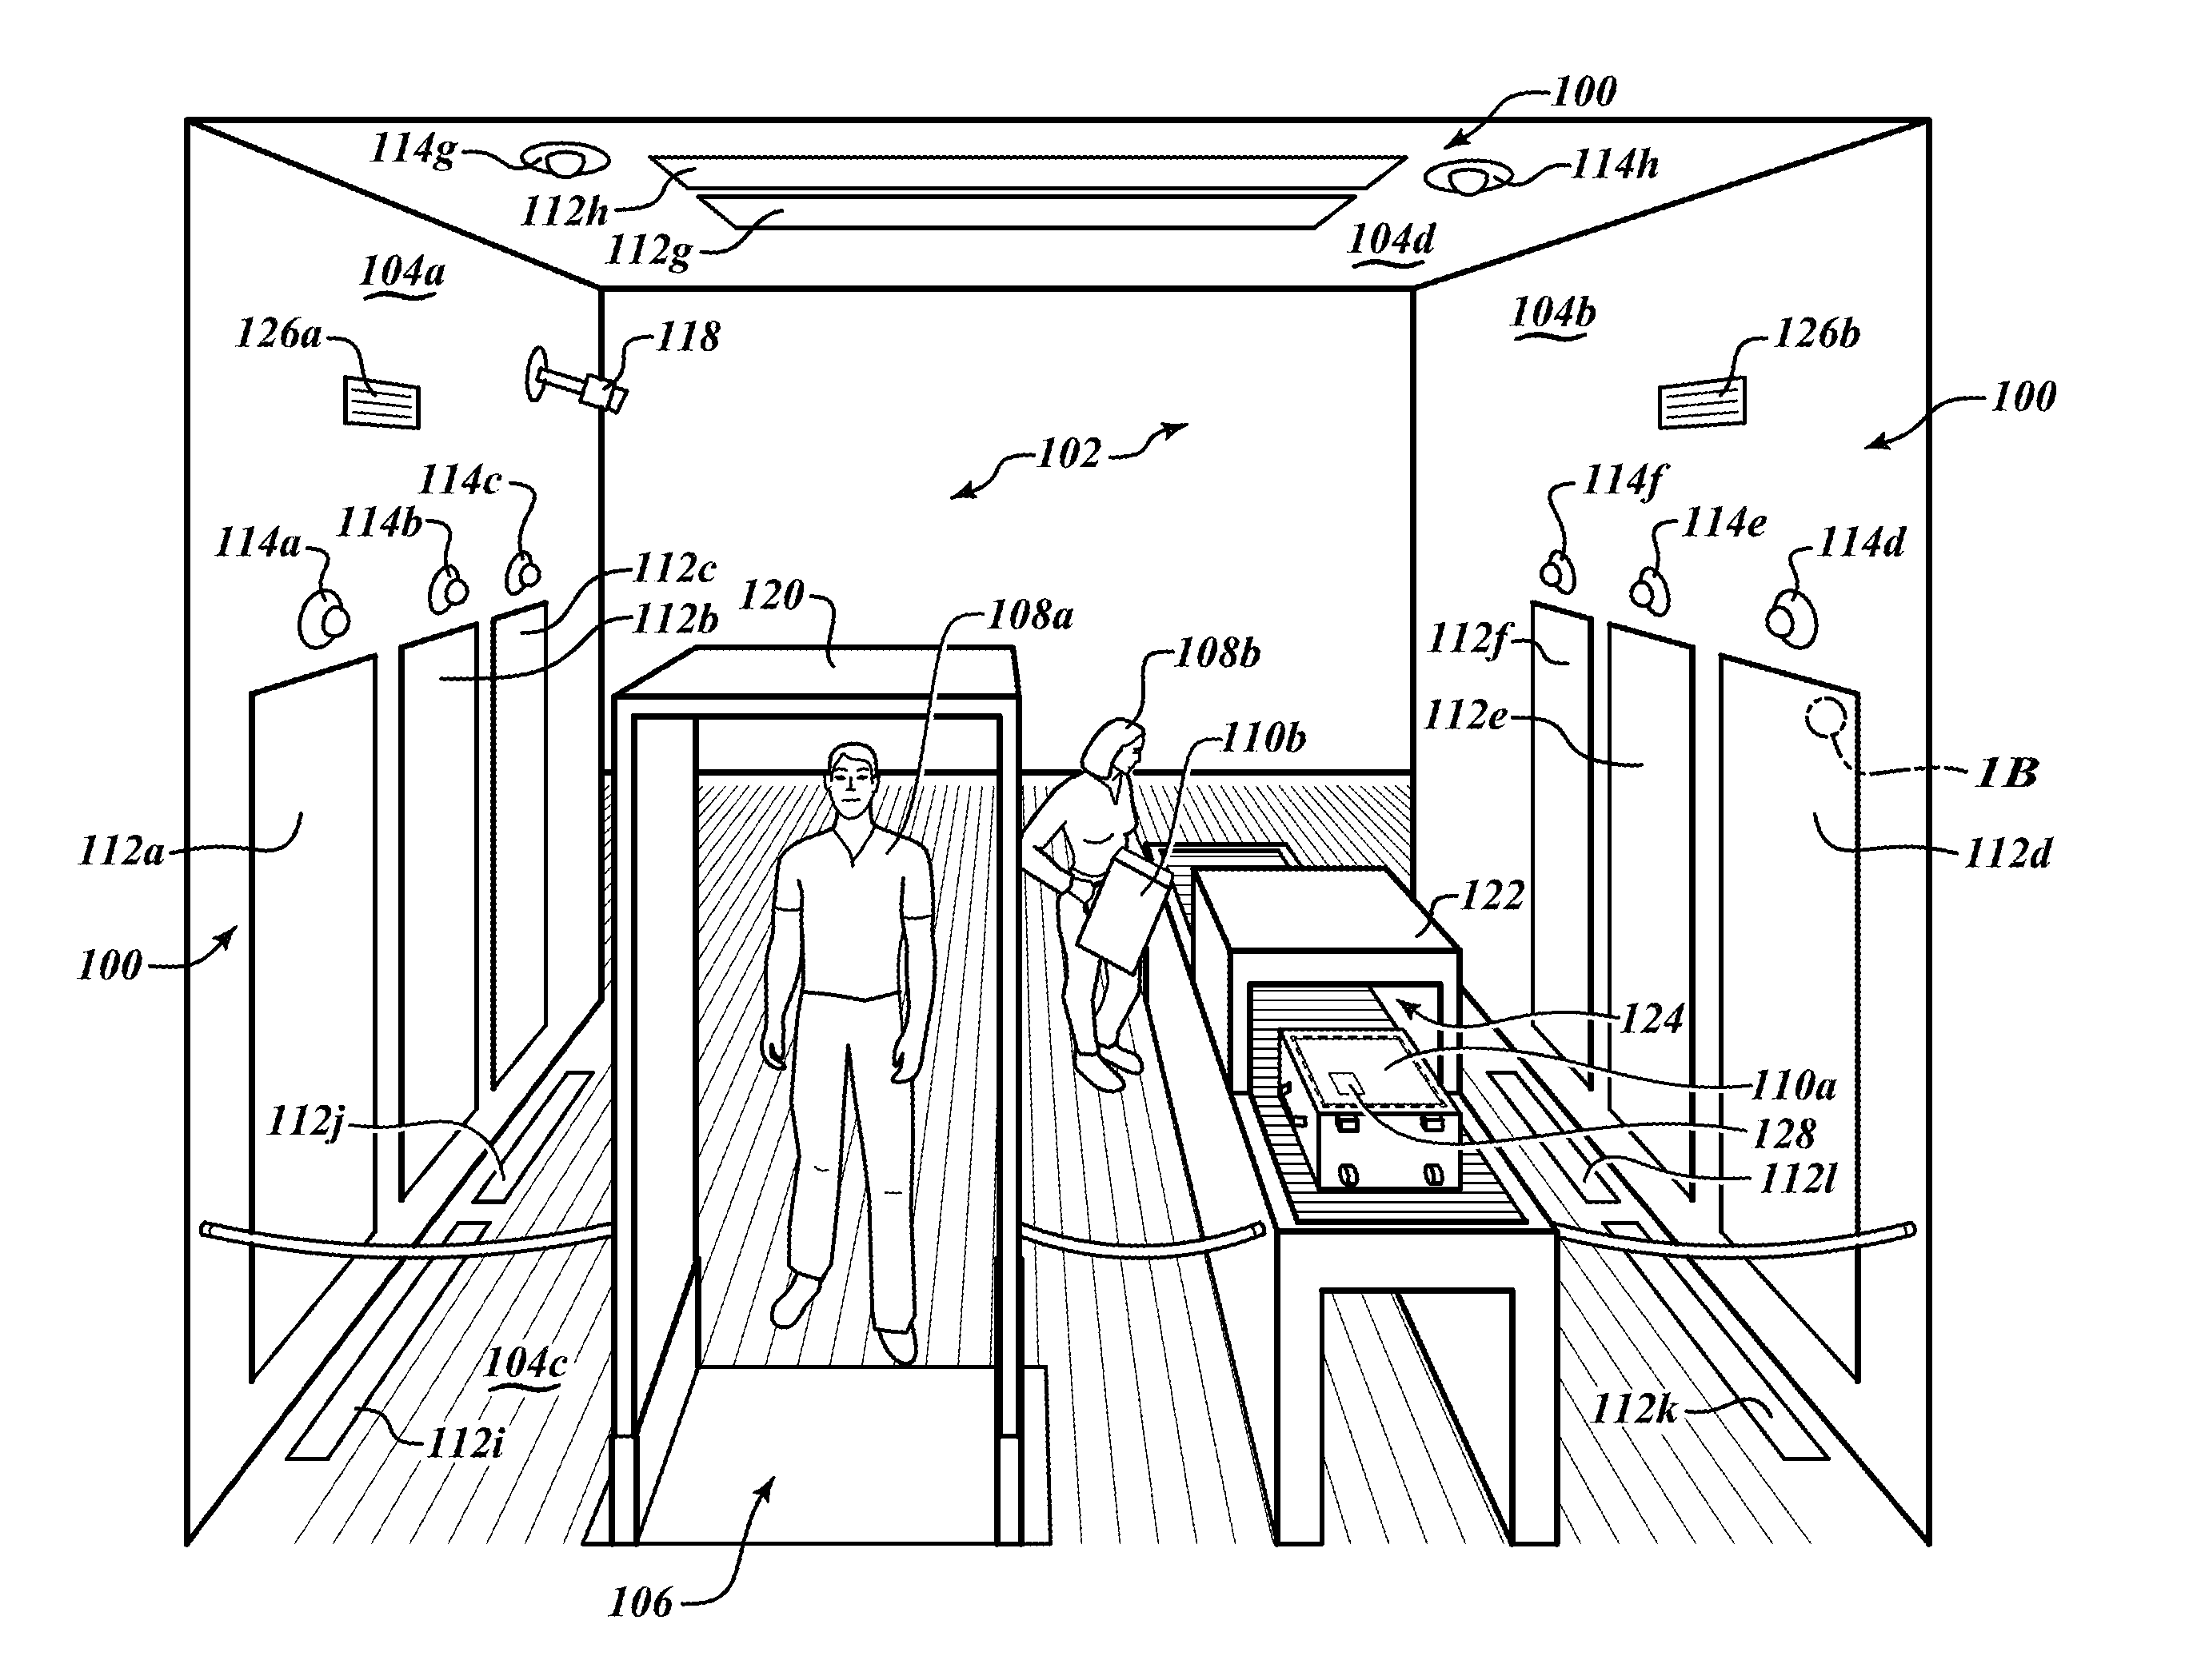 Area surveillance systems and methods